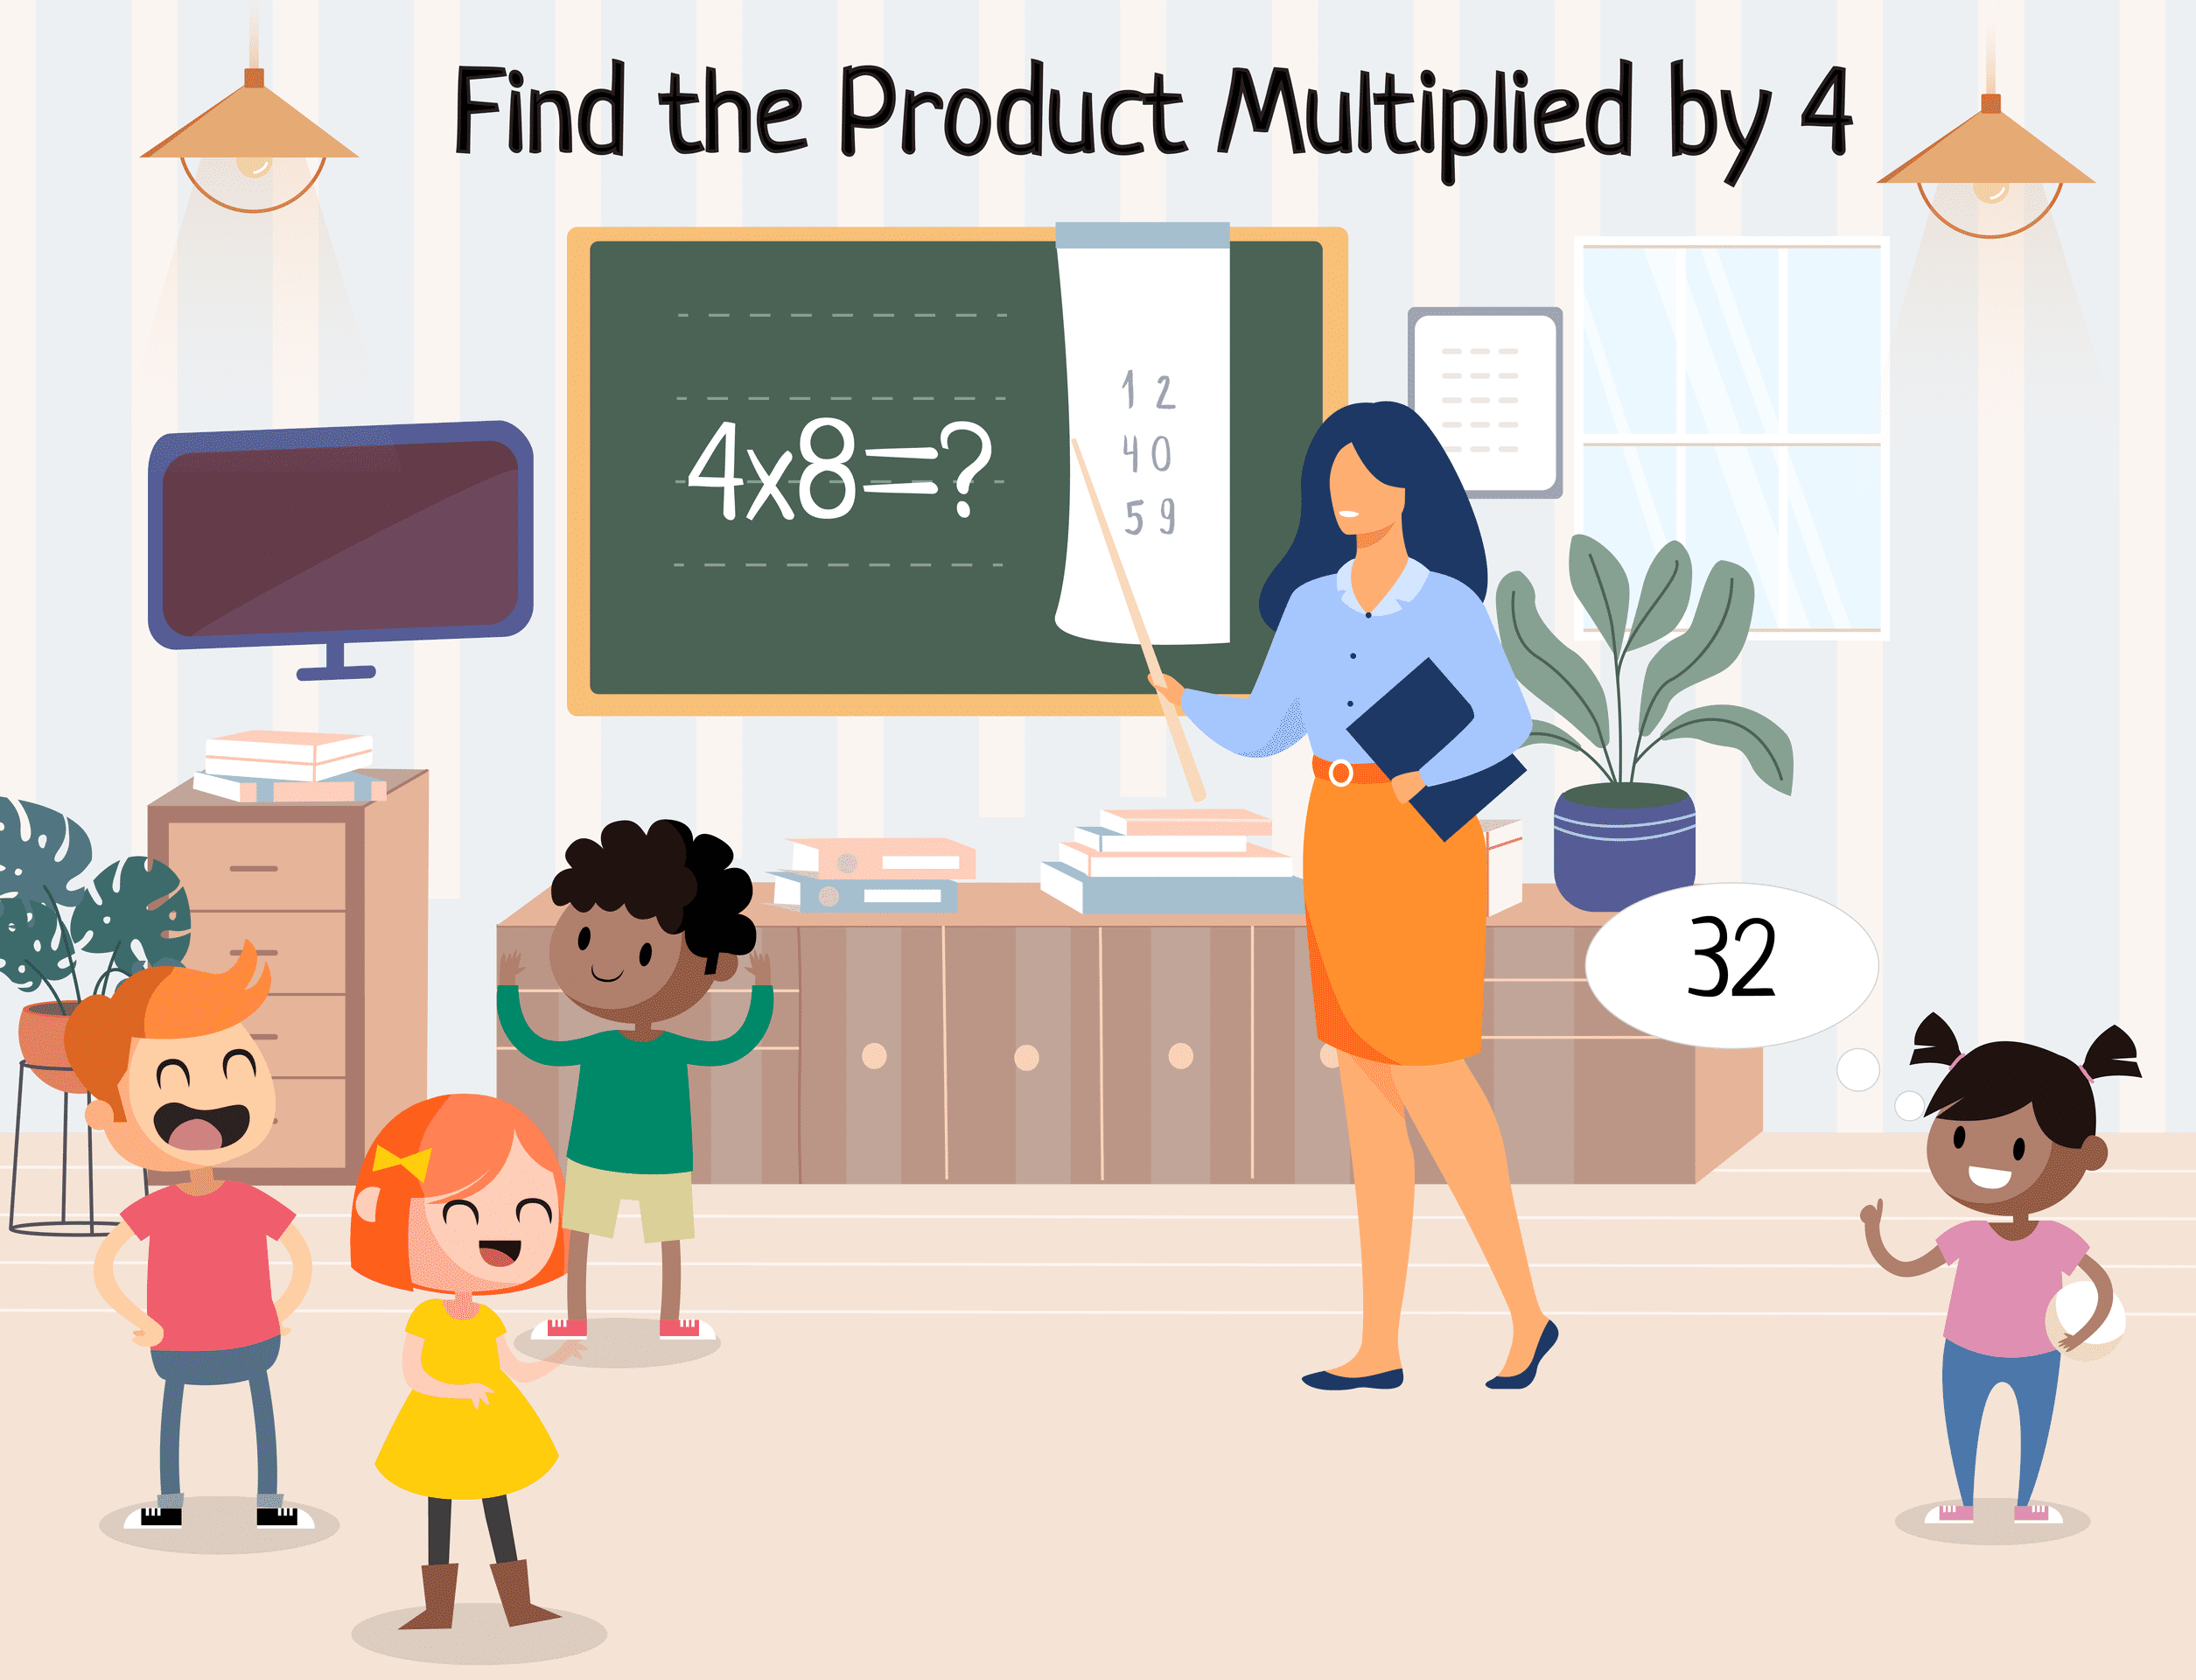 Find the Product Multiplied by 4